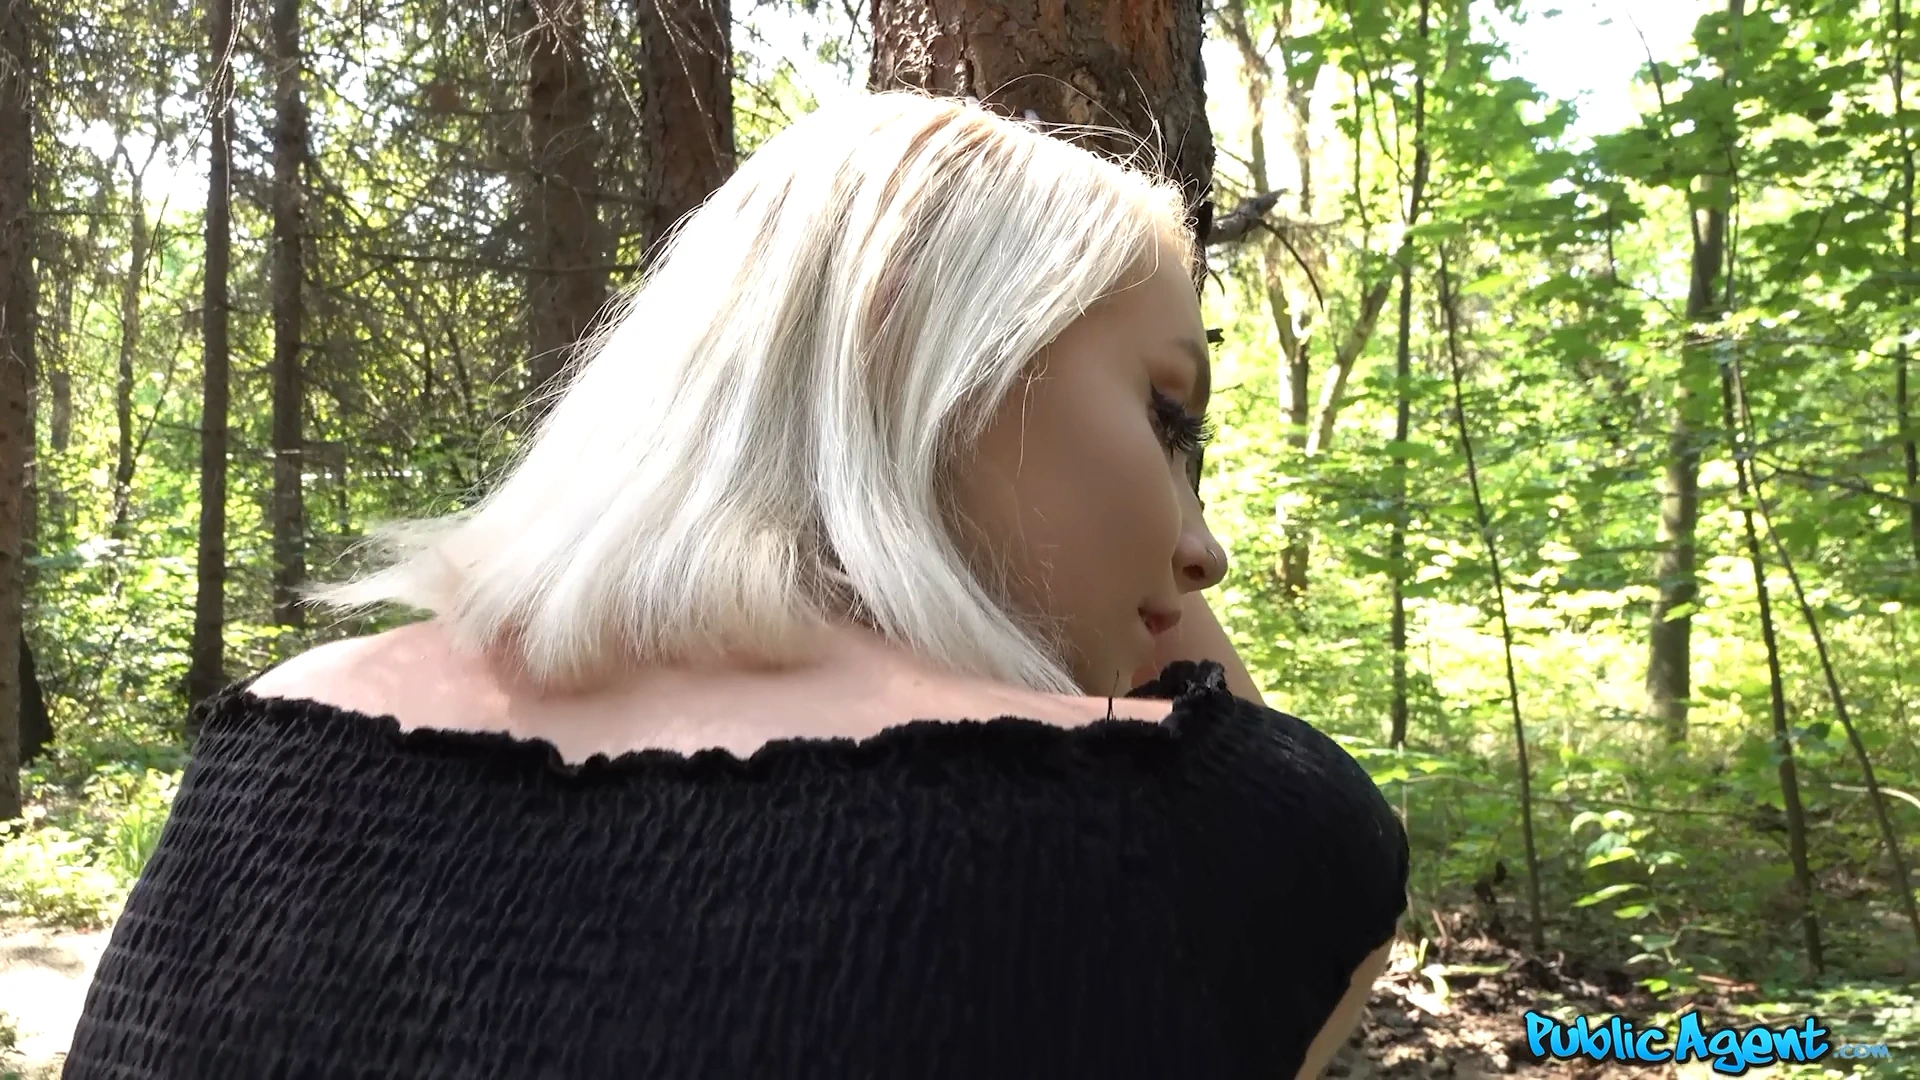 PublicAgent - Marilyn Sugar - Teen dream fucked hard in the woods